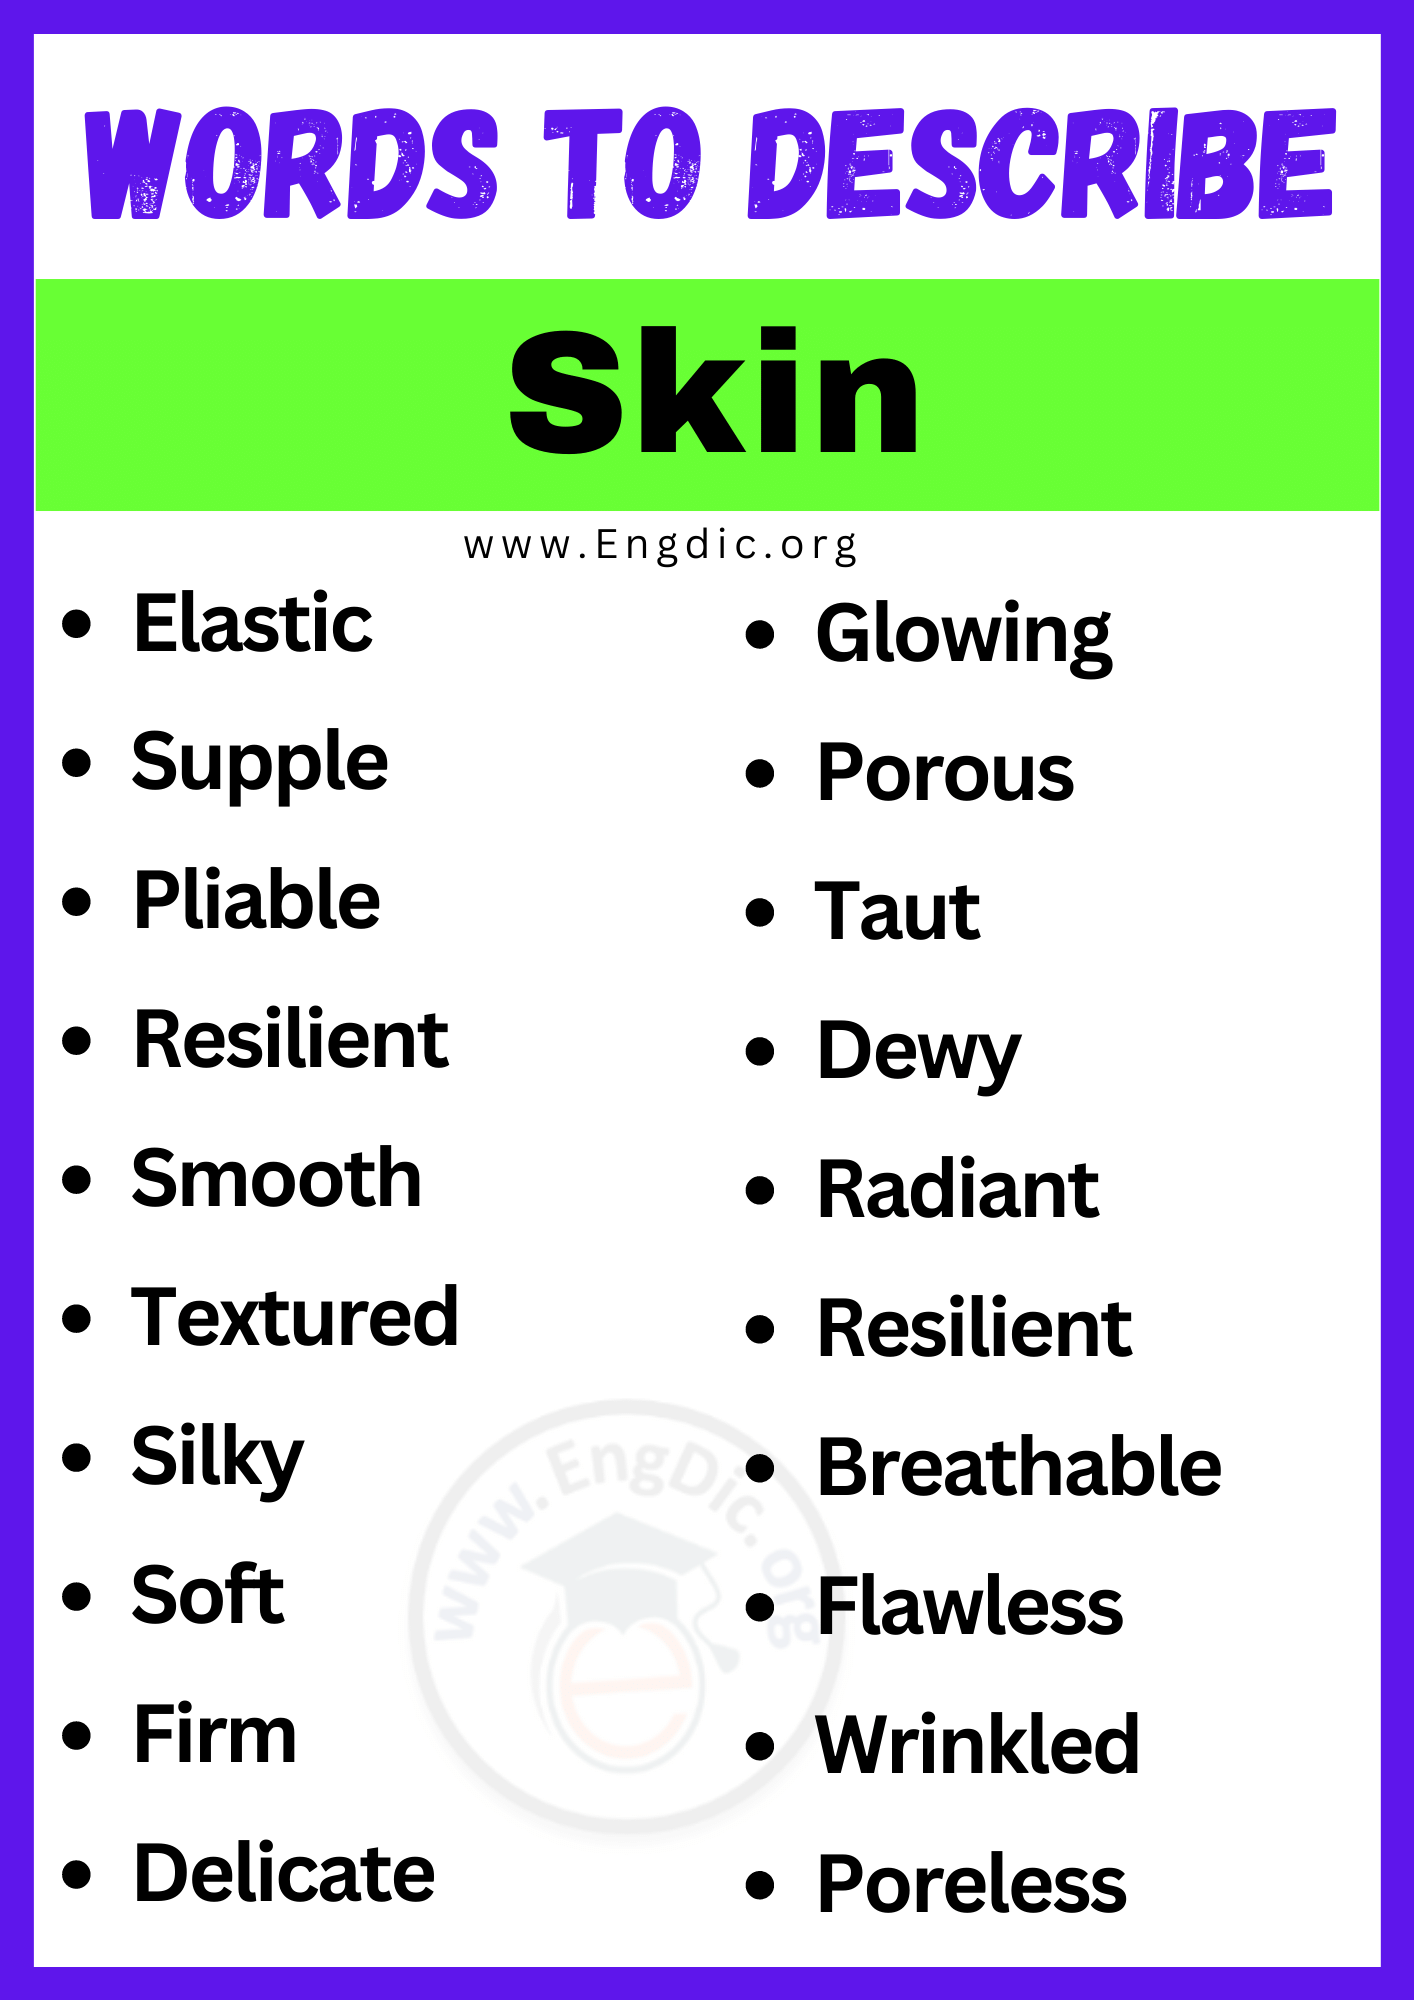 Words to Describe Skin